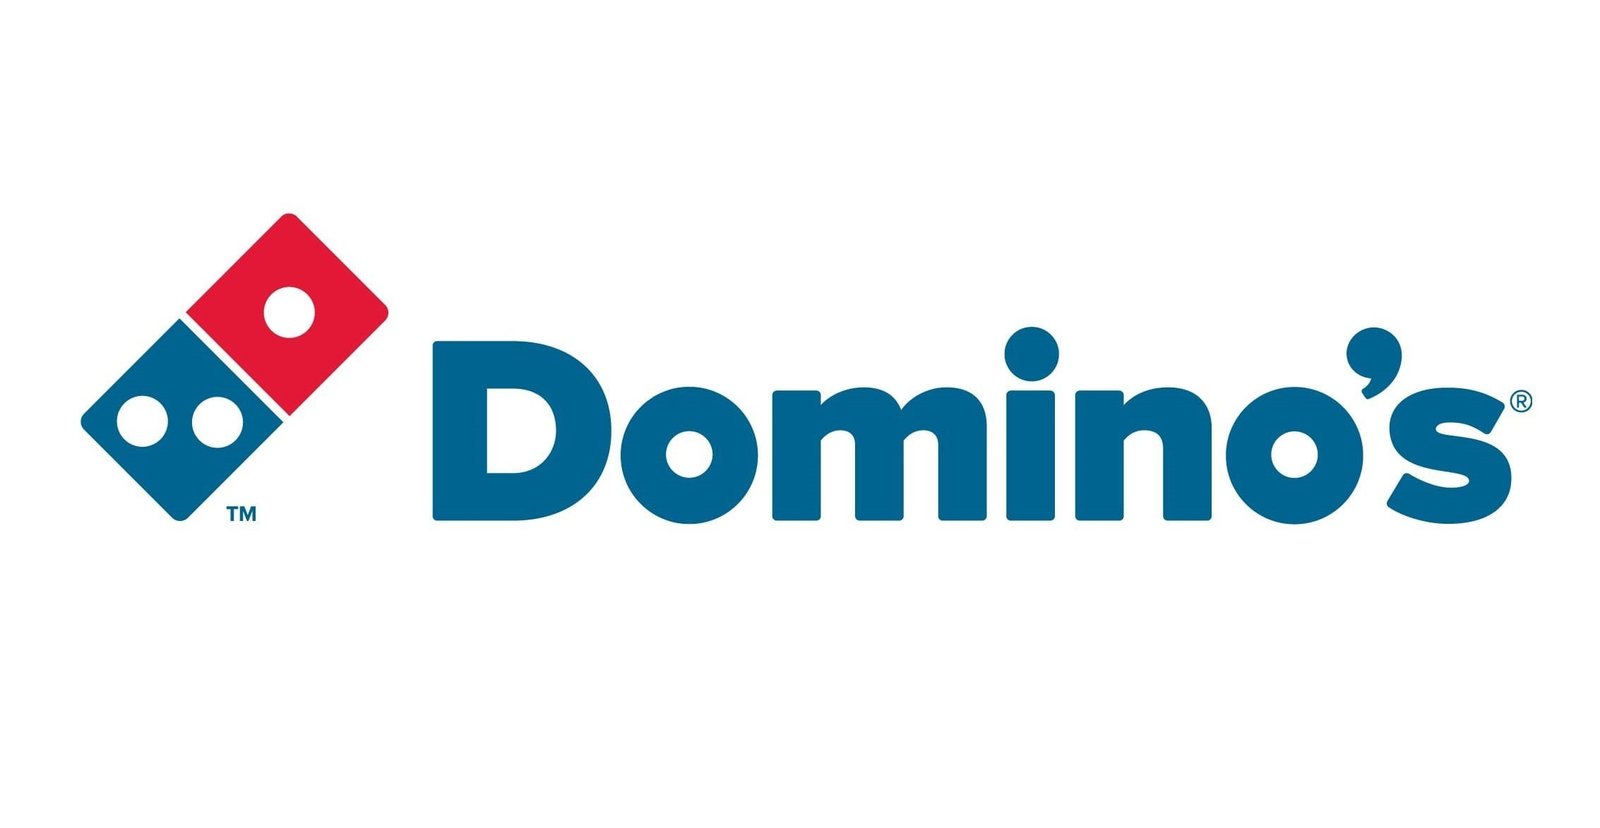 Marketing Strategy of Dominos